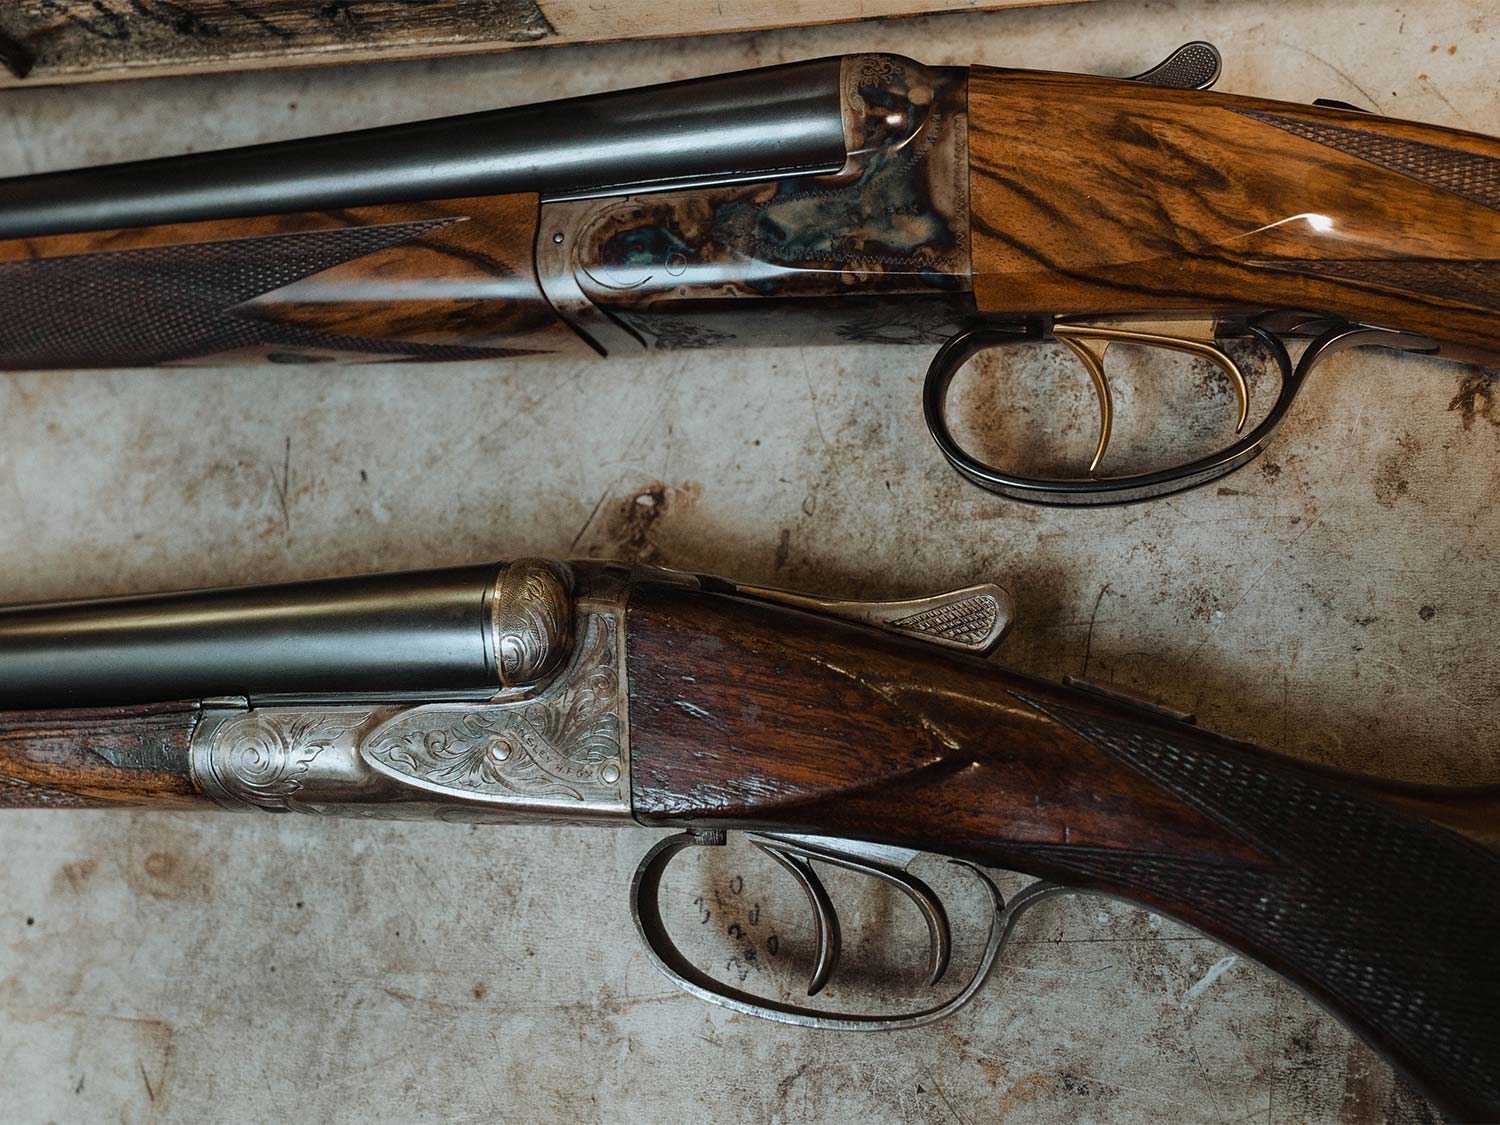 Two side-by-side-shotguns with great woodwork and custom engraving.